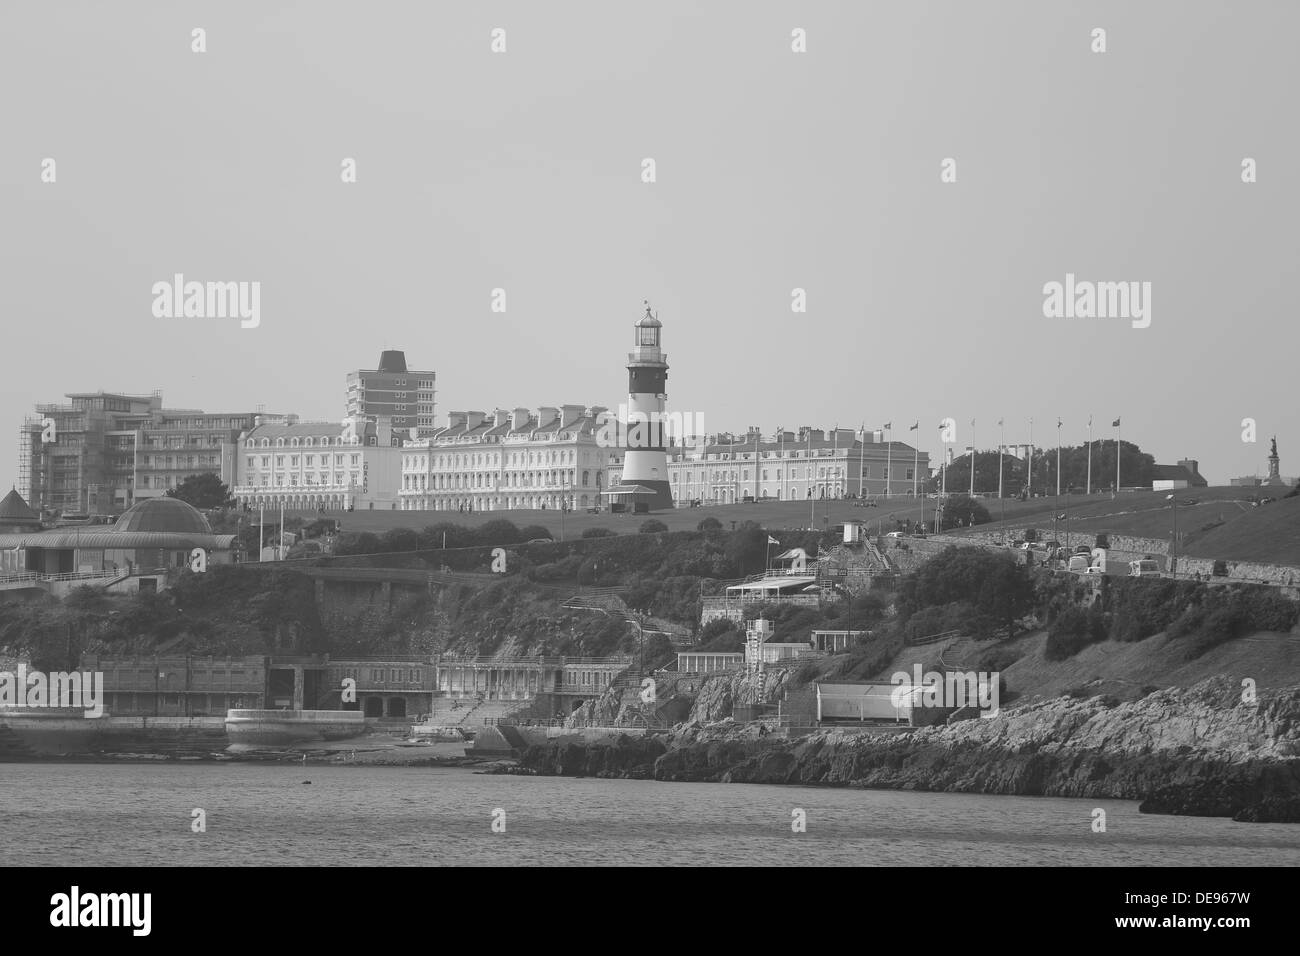 Smeatons tower Lighthouse Plymouth Hoe Plymouth Devon Uk Stock Photo